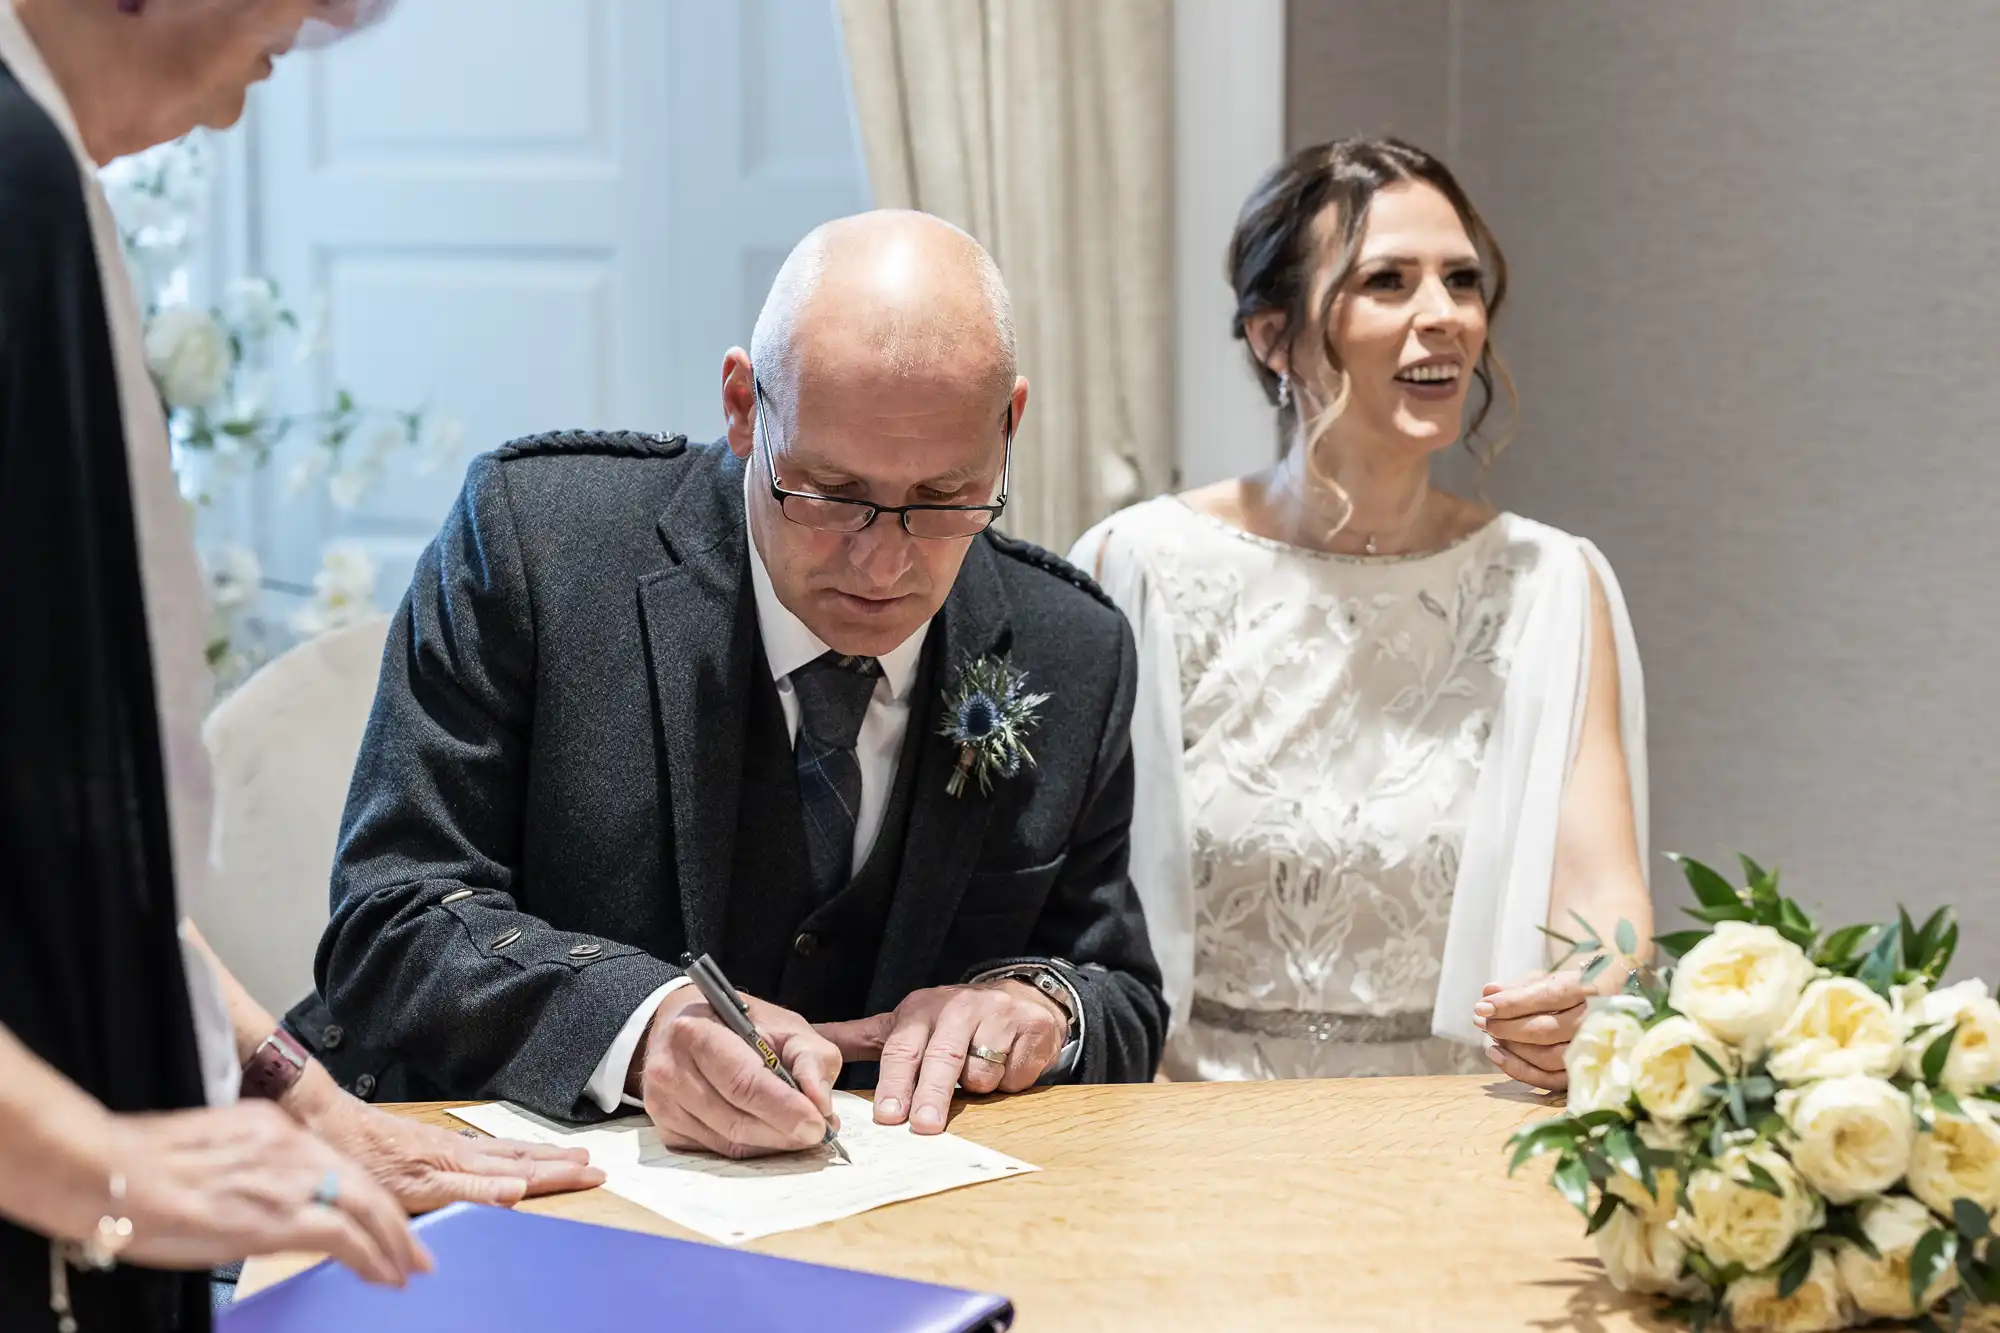 A man in a suit signs a document at a table beside a smiling woman in a white dress holding a bouquet of yellow roses. Another person holds a blue folder in the foreground.